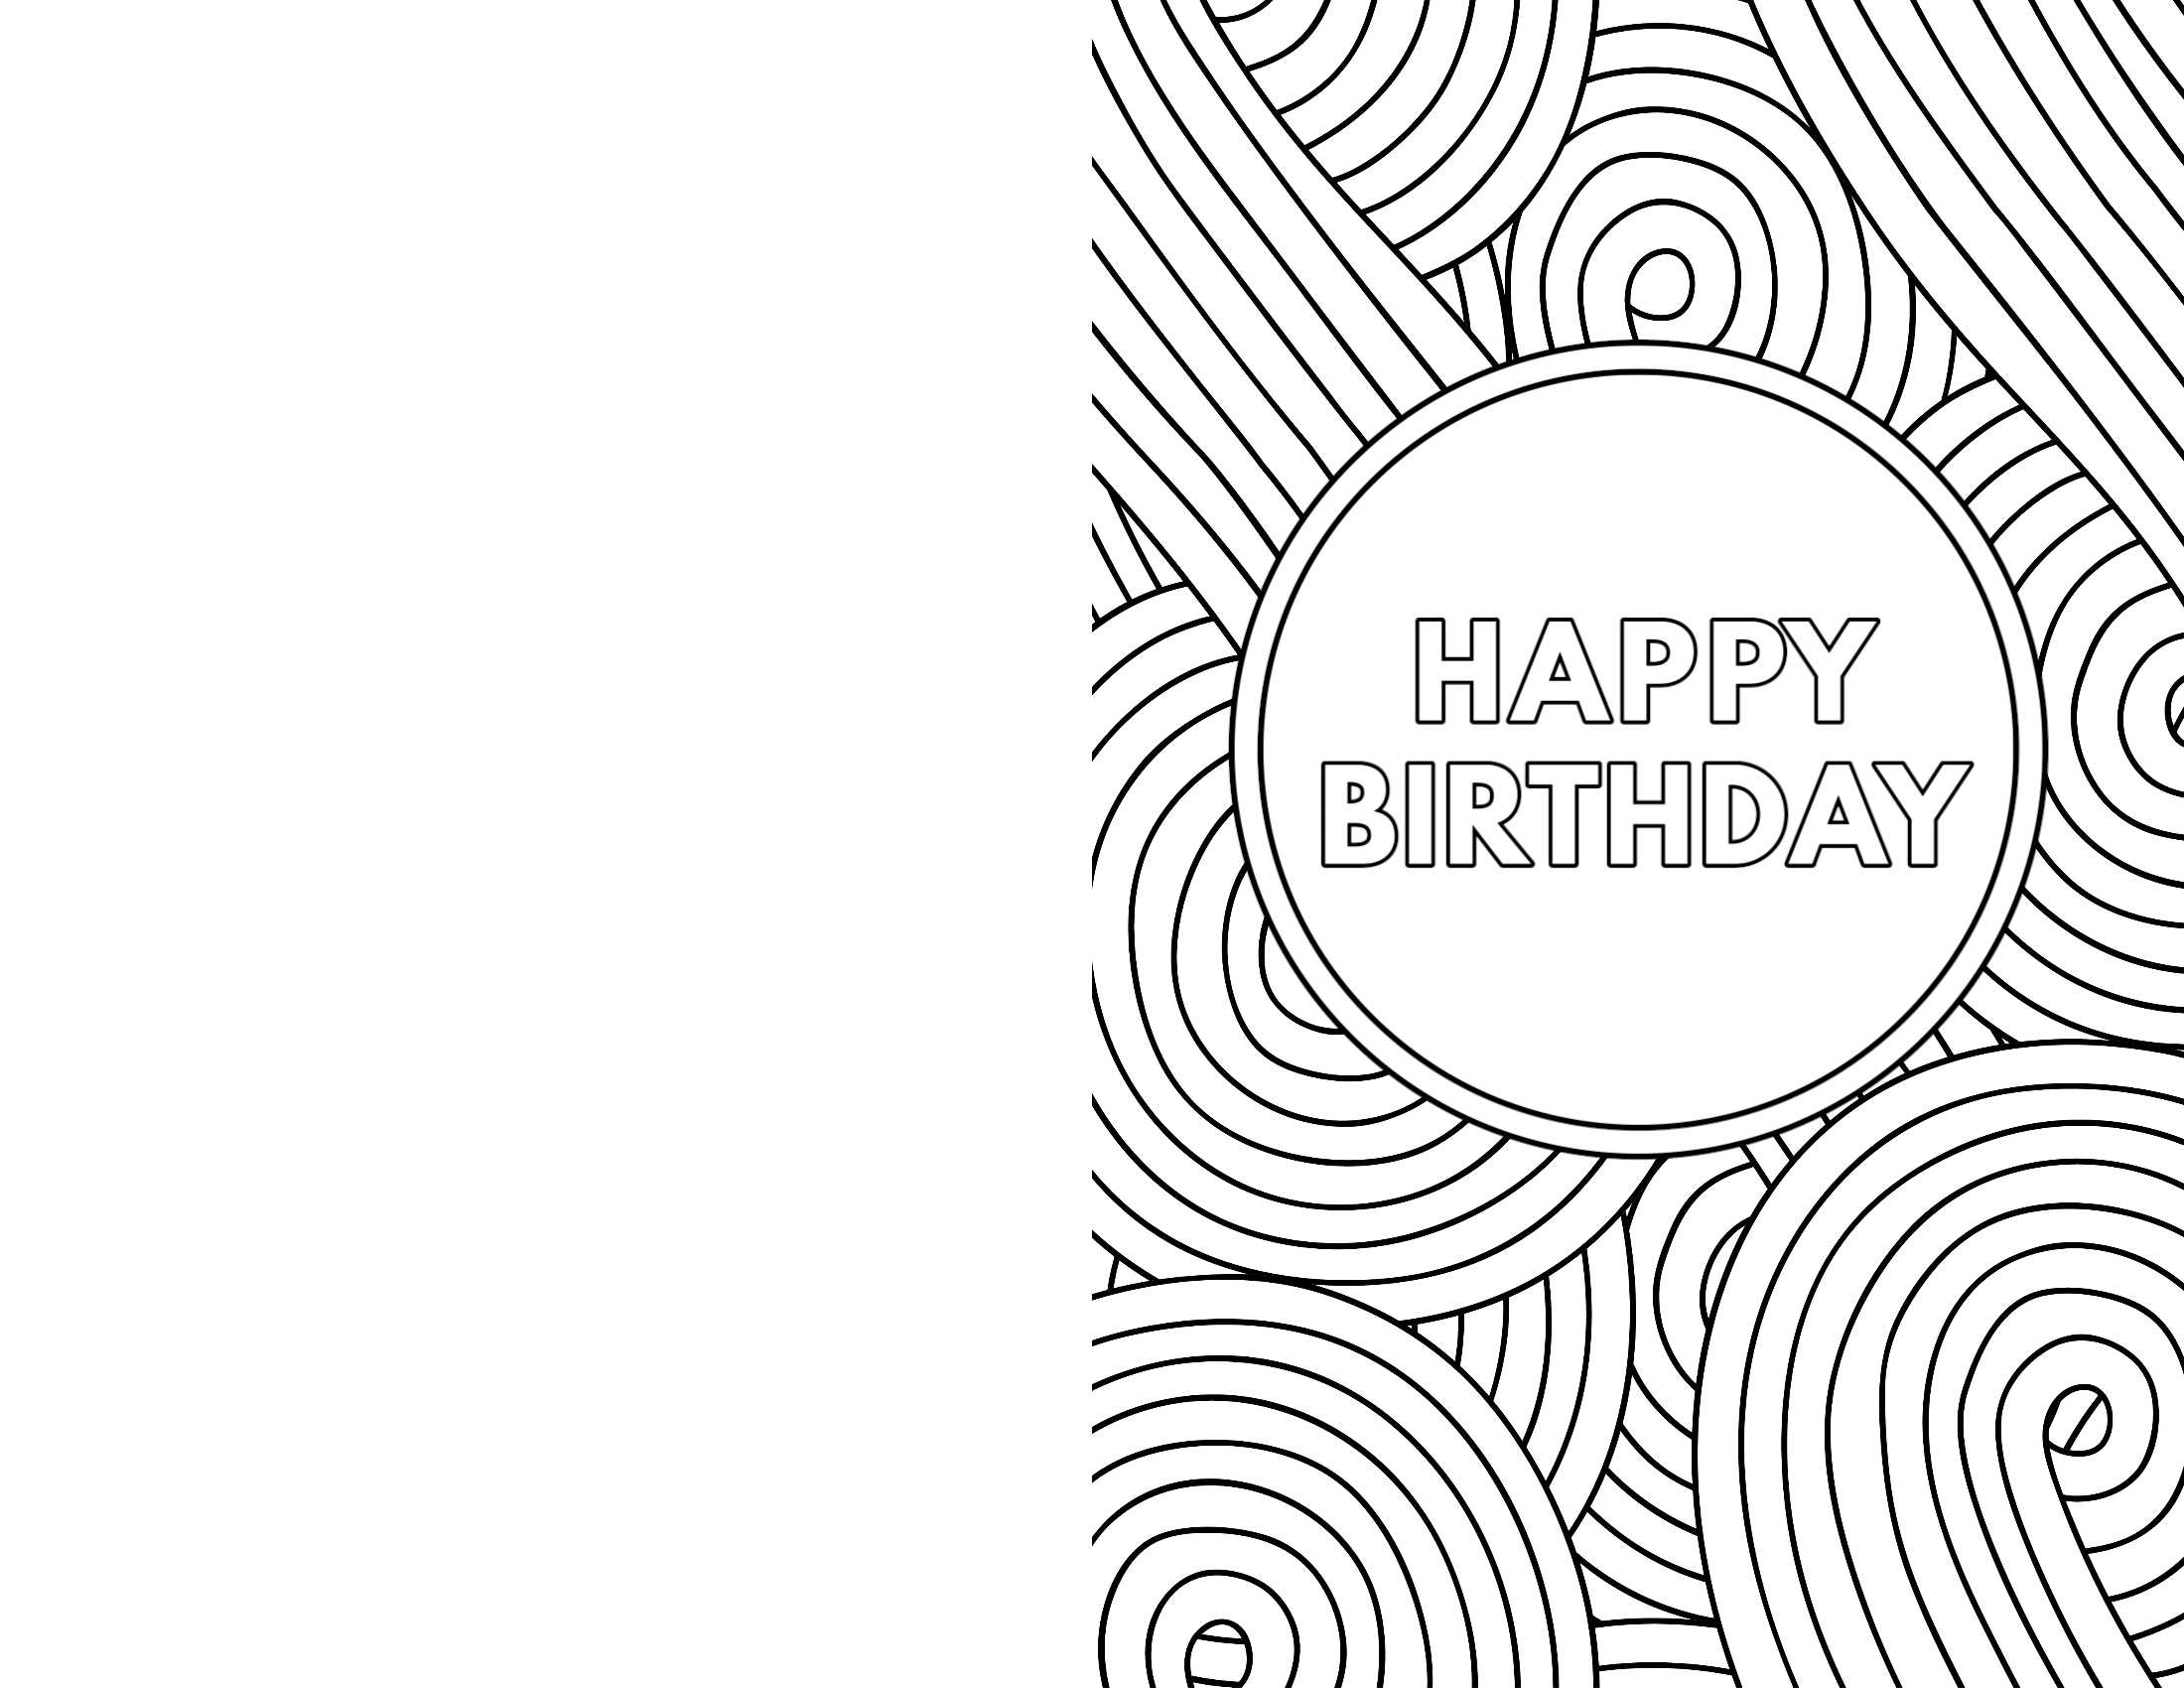 Free Printable Birthday Cards – Paper Trail Design Inside Foldable Birthday Card Template